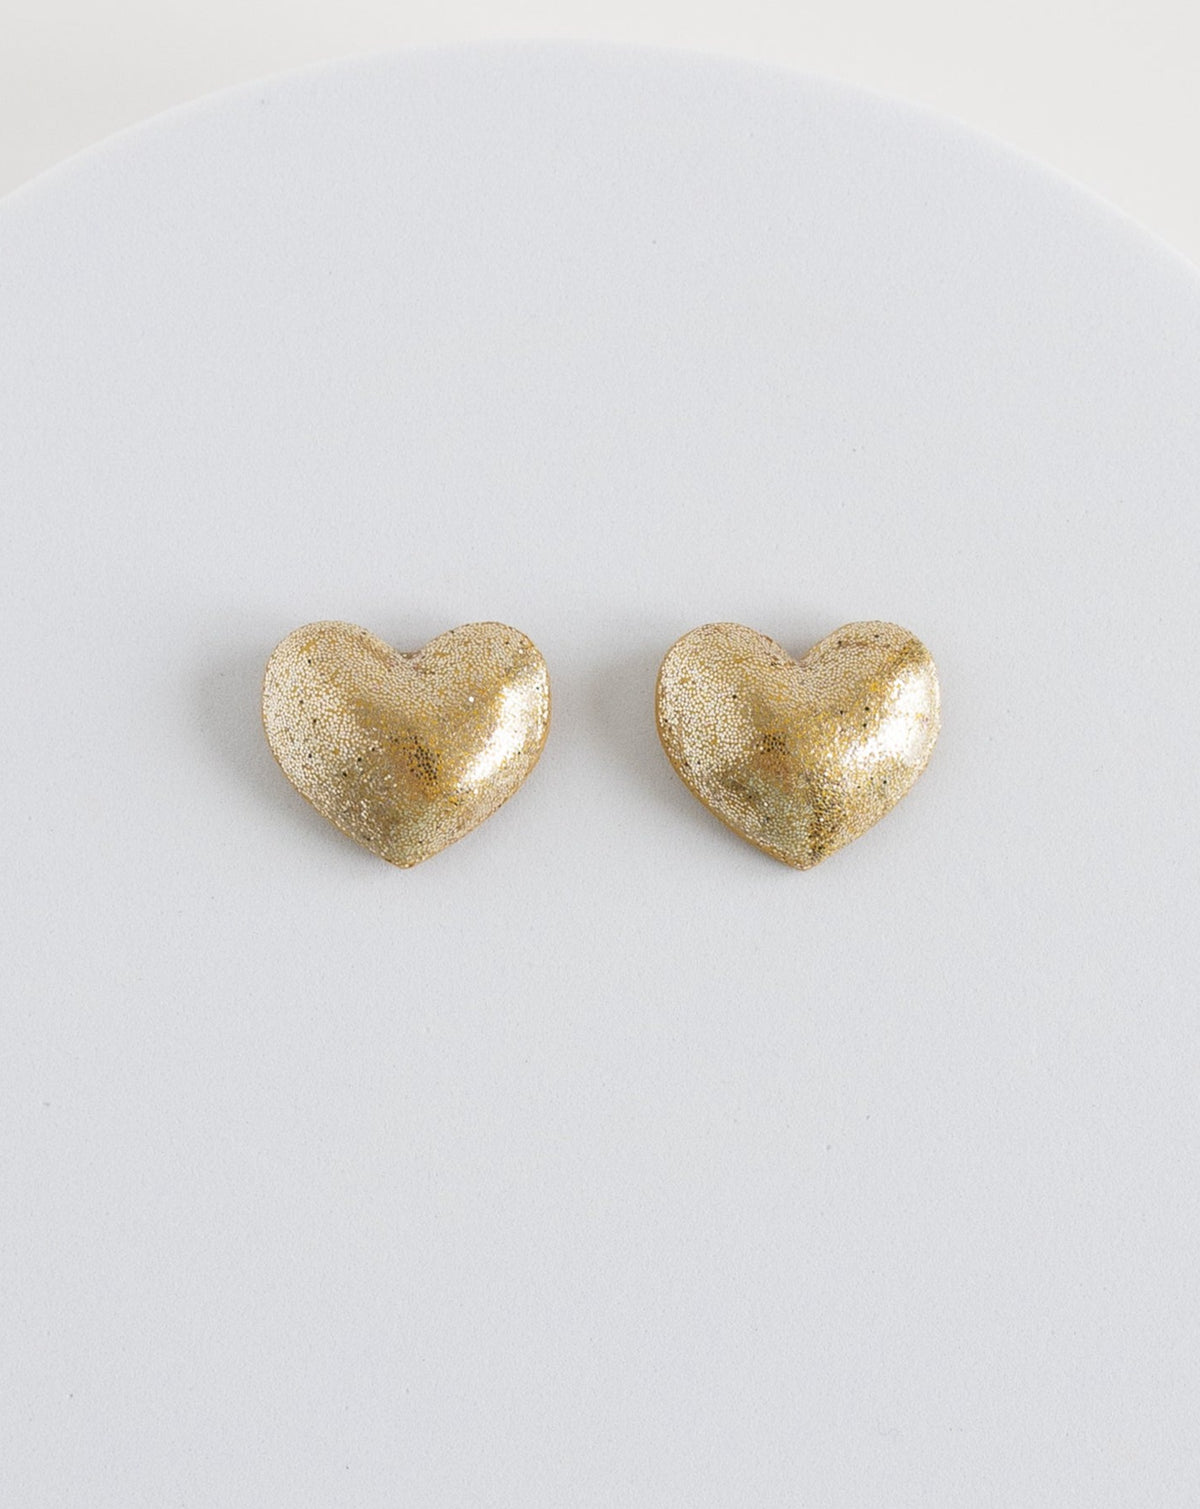 Gold heart stud earrings on display, 3 cm length, Hand crafted in the Netherlands by LYHO.